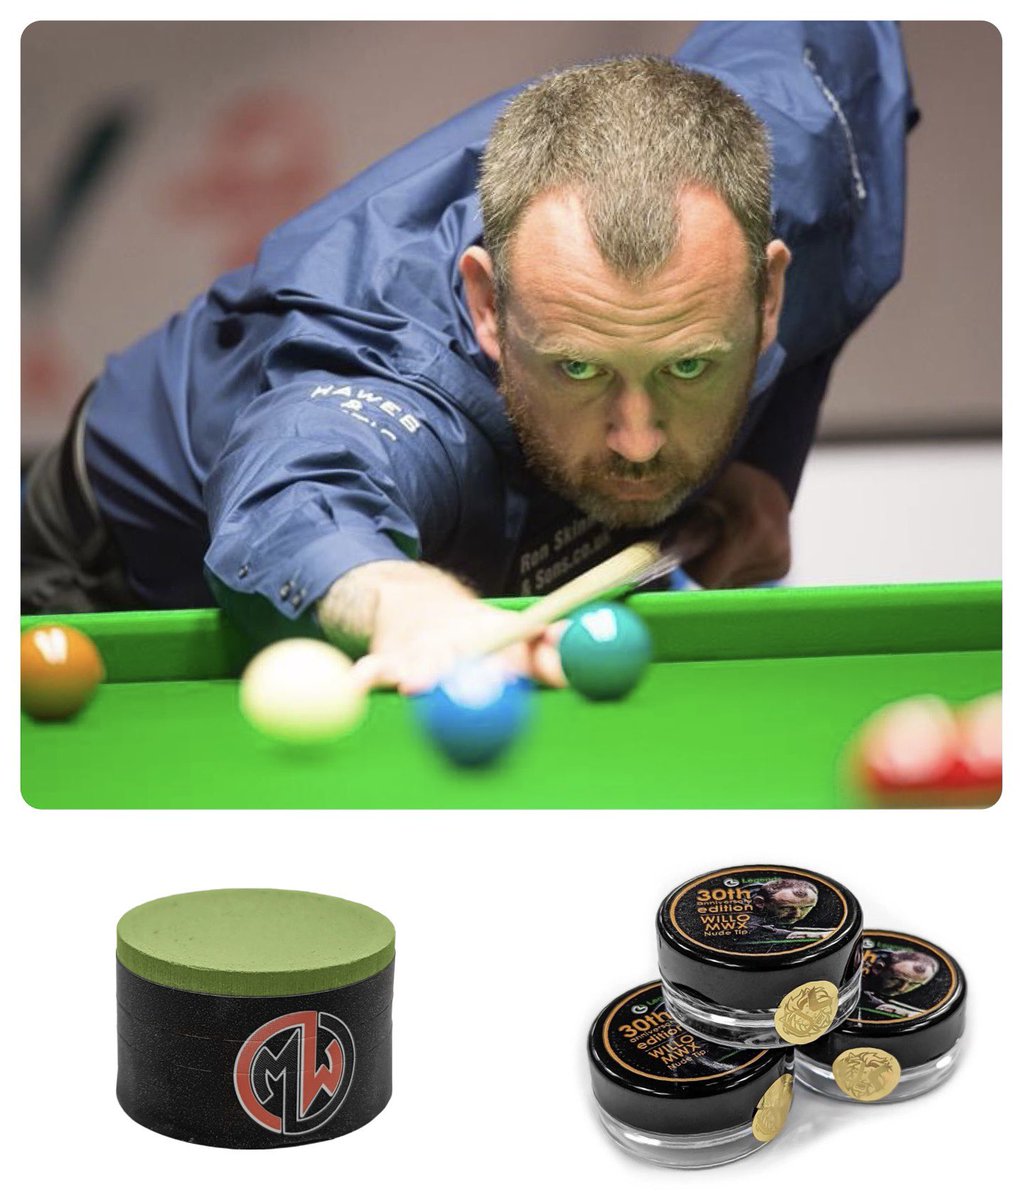 Congratulations to @markwil147 on winning the 2023 British Open Snooker Championships tonight using the Best hardest Tips ever the Legends 30tb anniversary Nude Tips… @Snookerlegends